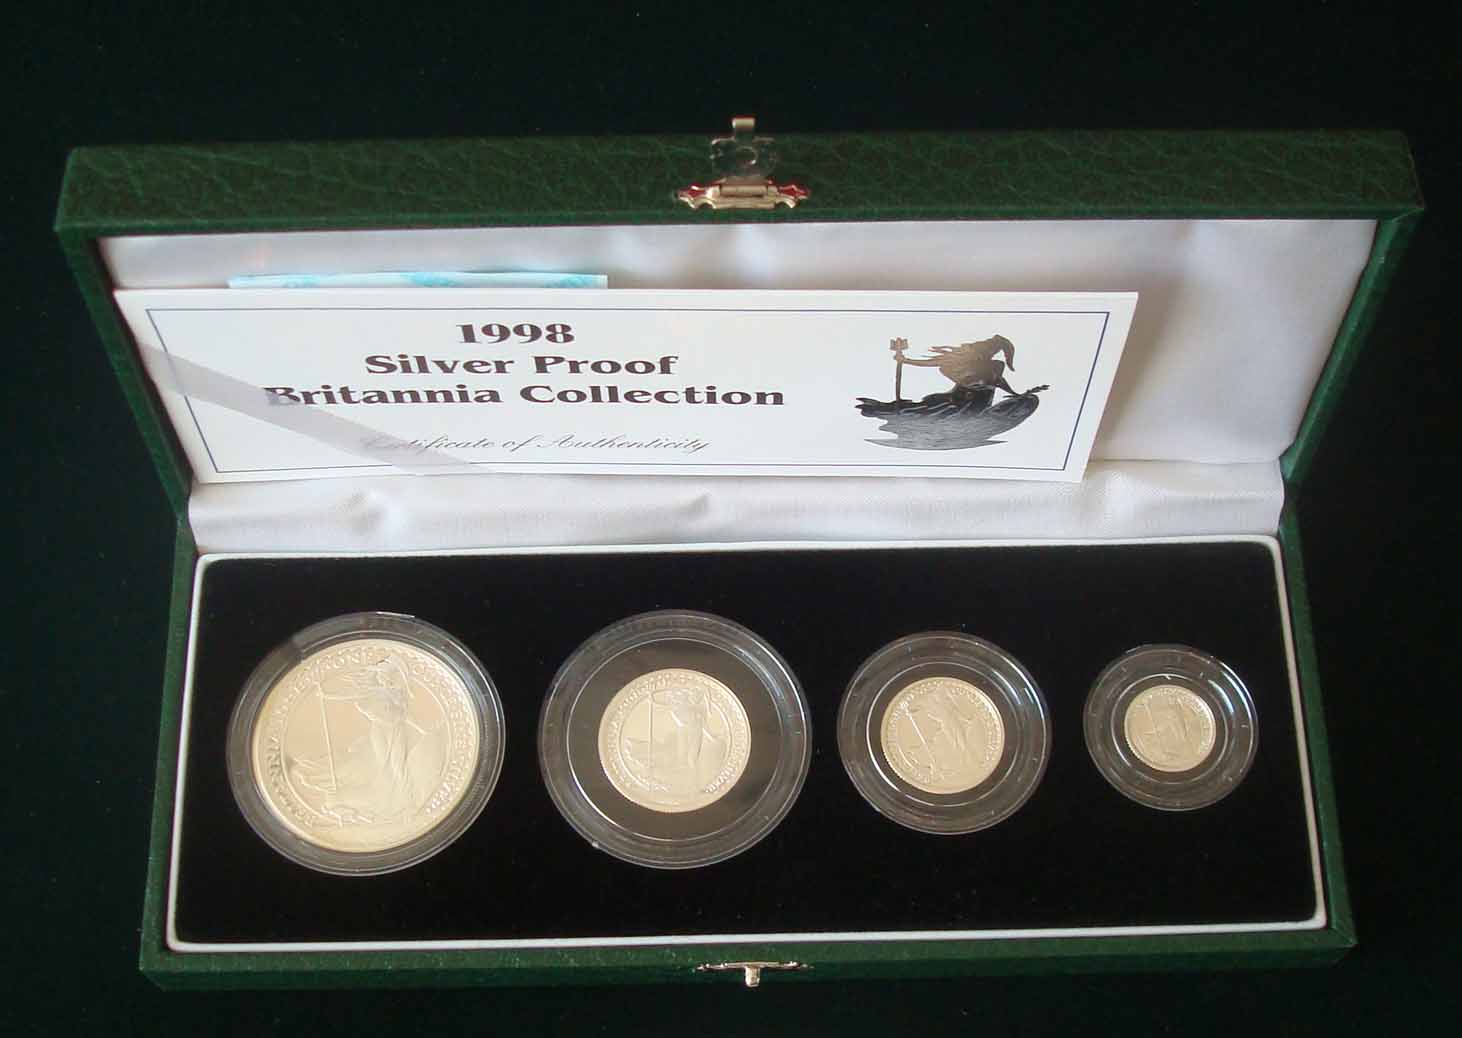 1998 Royal Mint Silver Proof Britannia Four Coin Collection: Which contains the first Silver